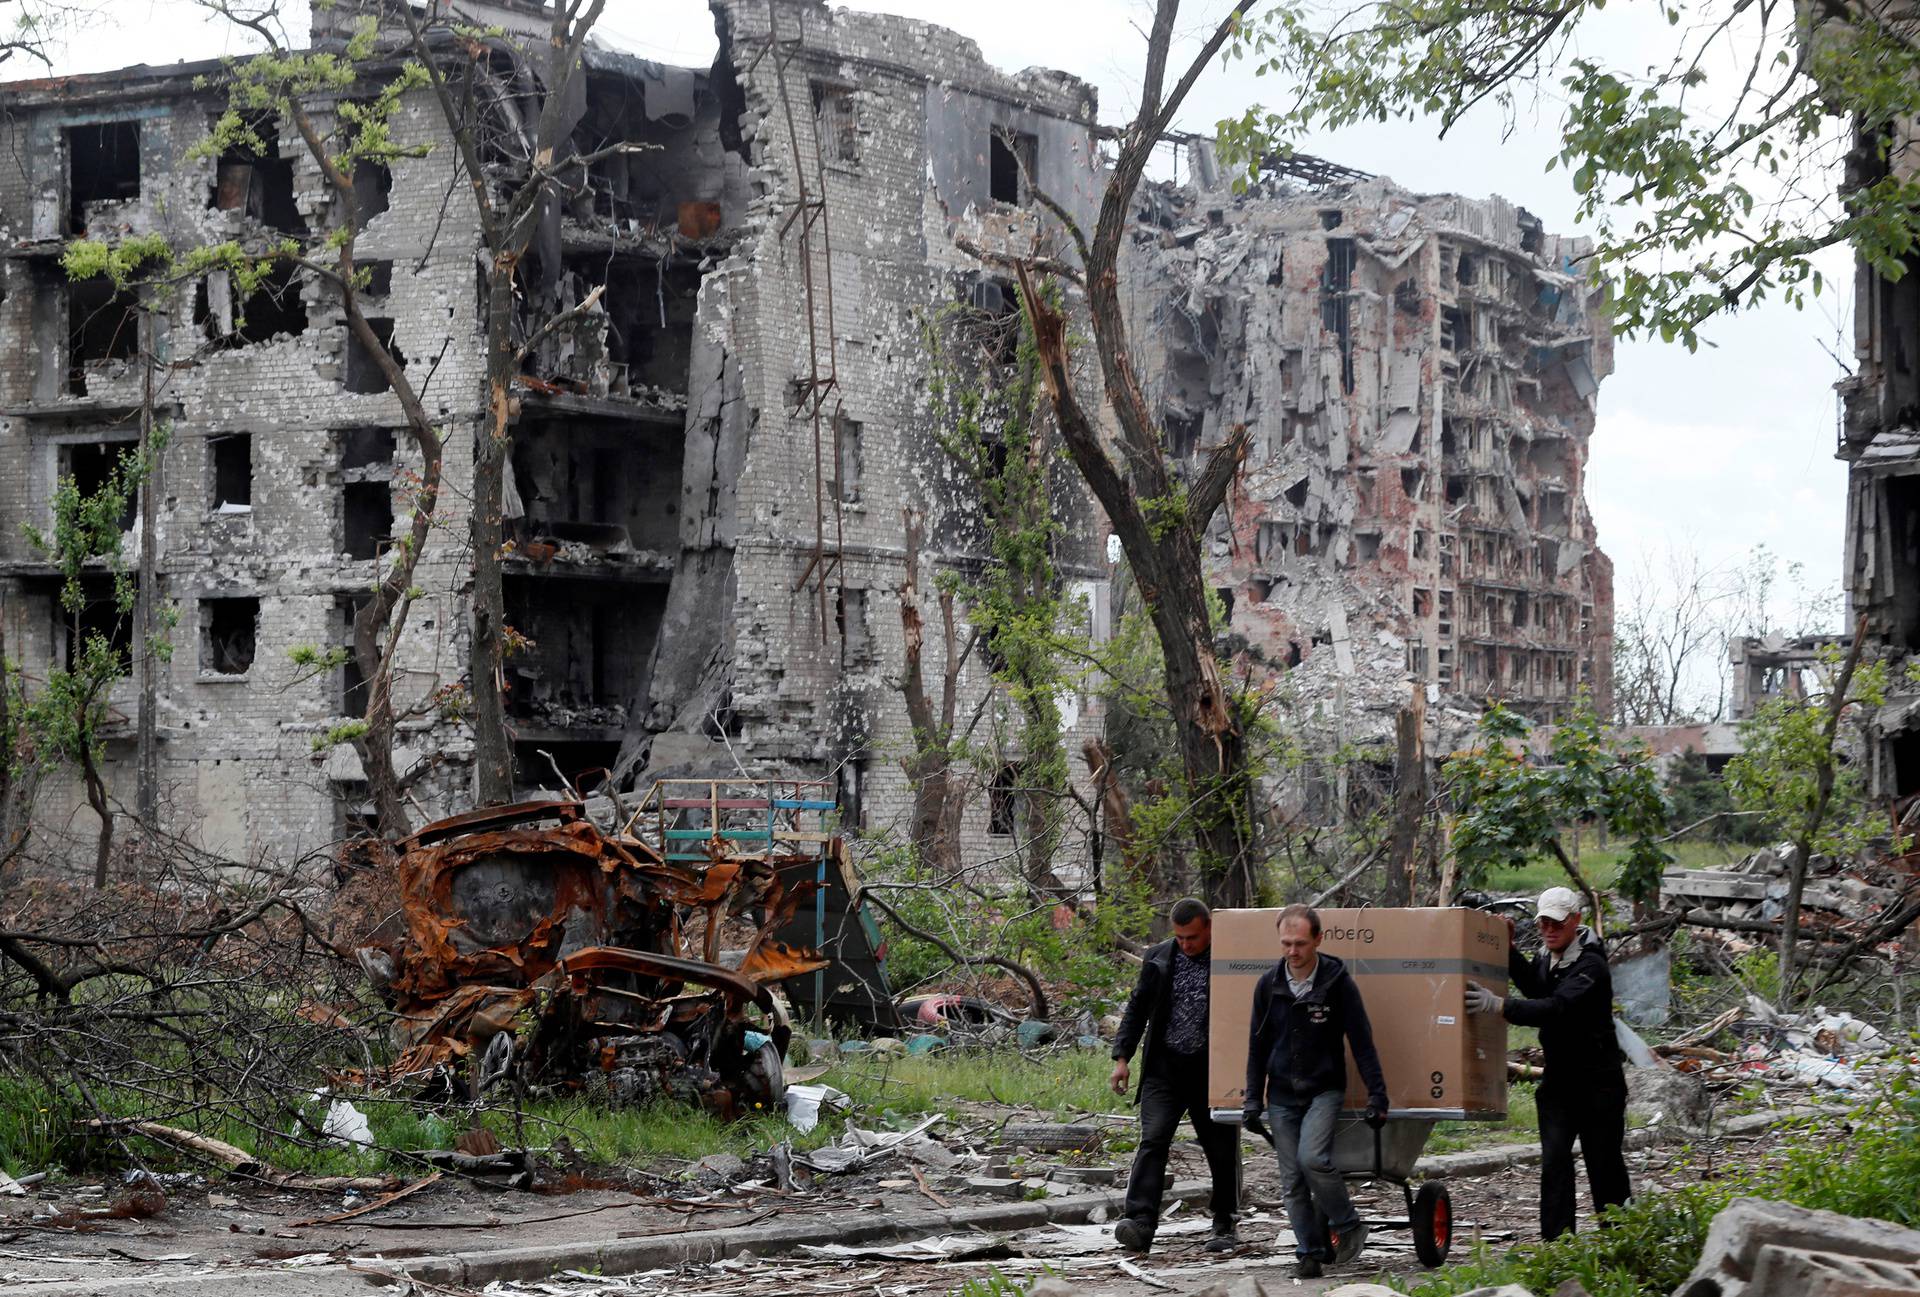 Local residents transport a box on a wheelbarrow past a heavily damaged apartment building in Mariupol